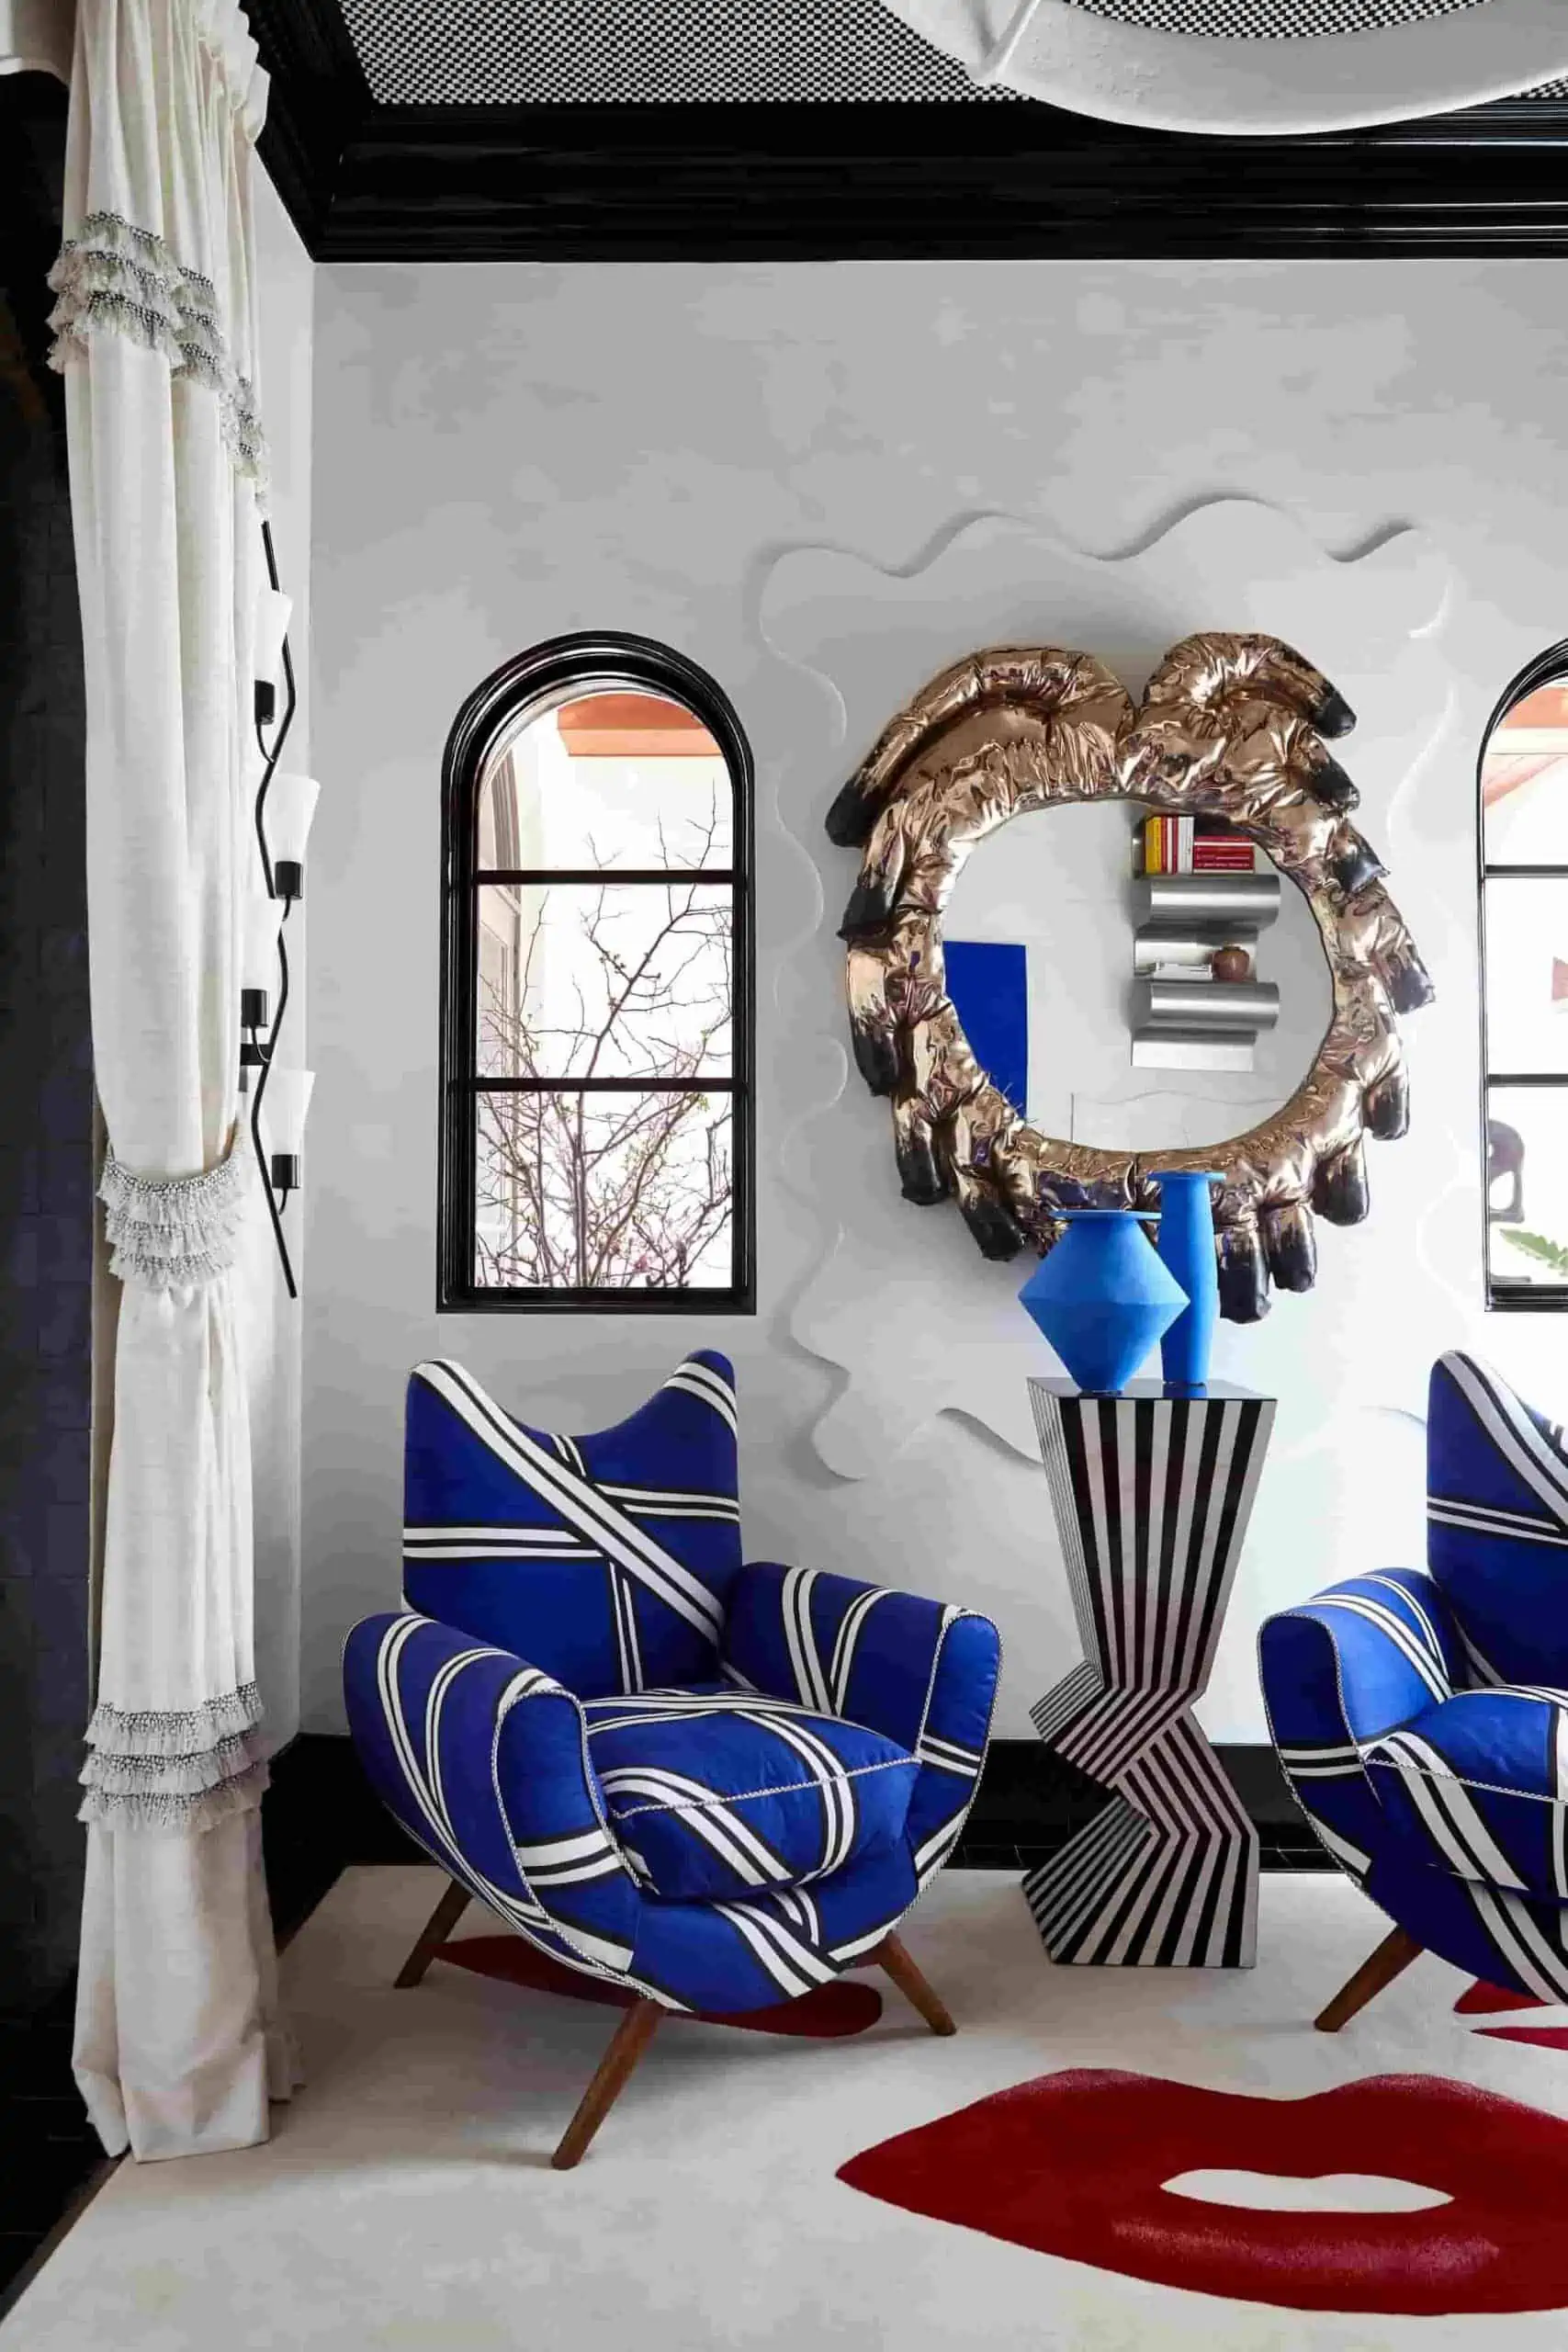 Quirky patterned armchair with striking blue color placed in a living room with wall mirror and a white rug.